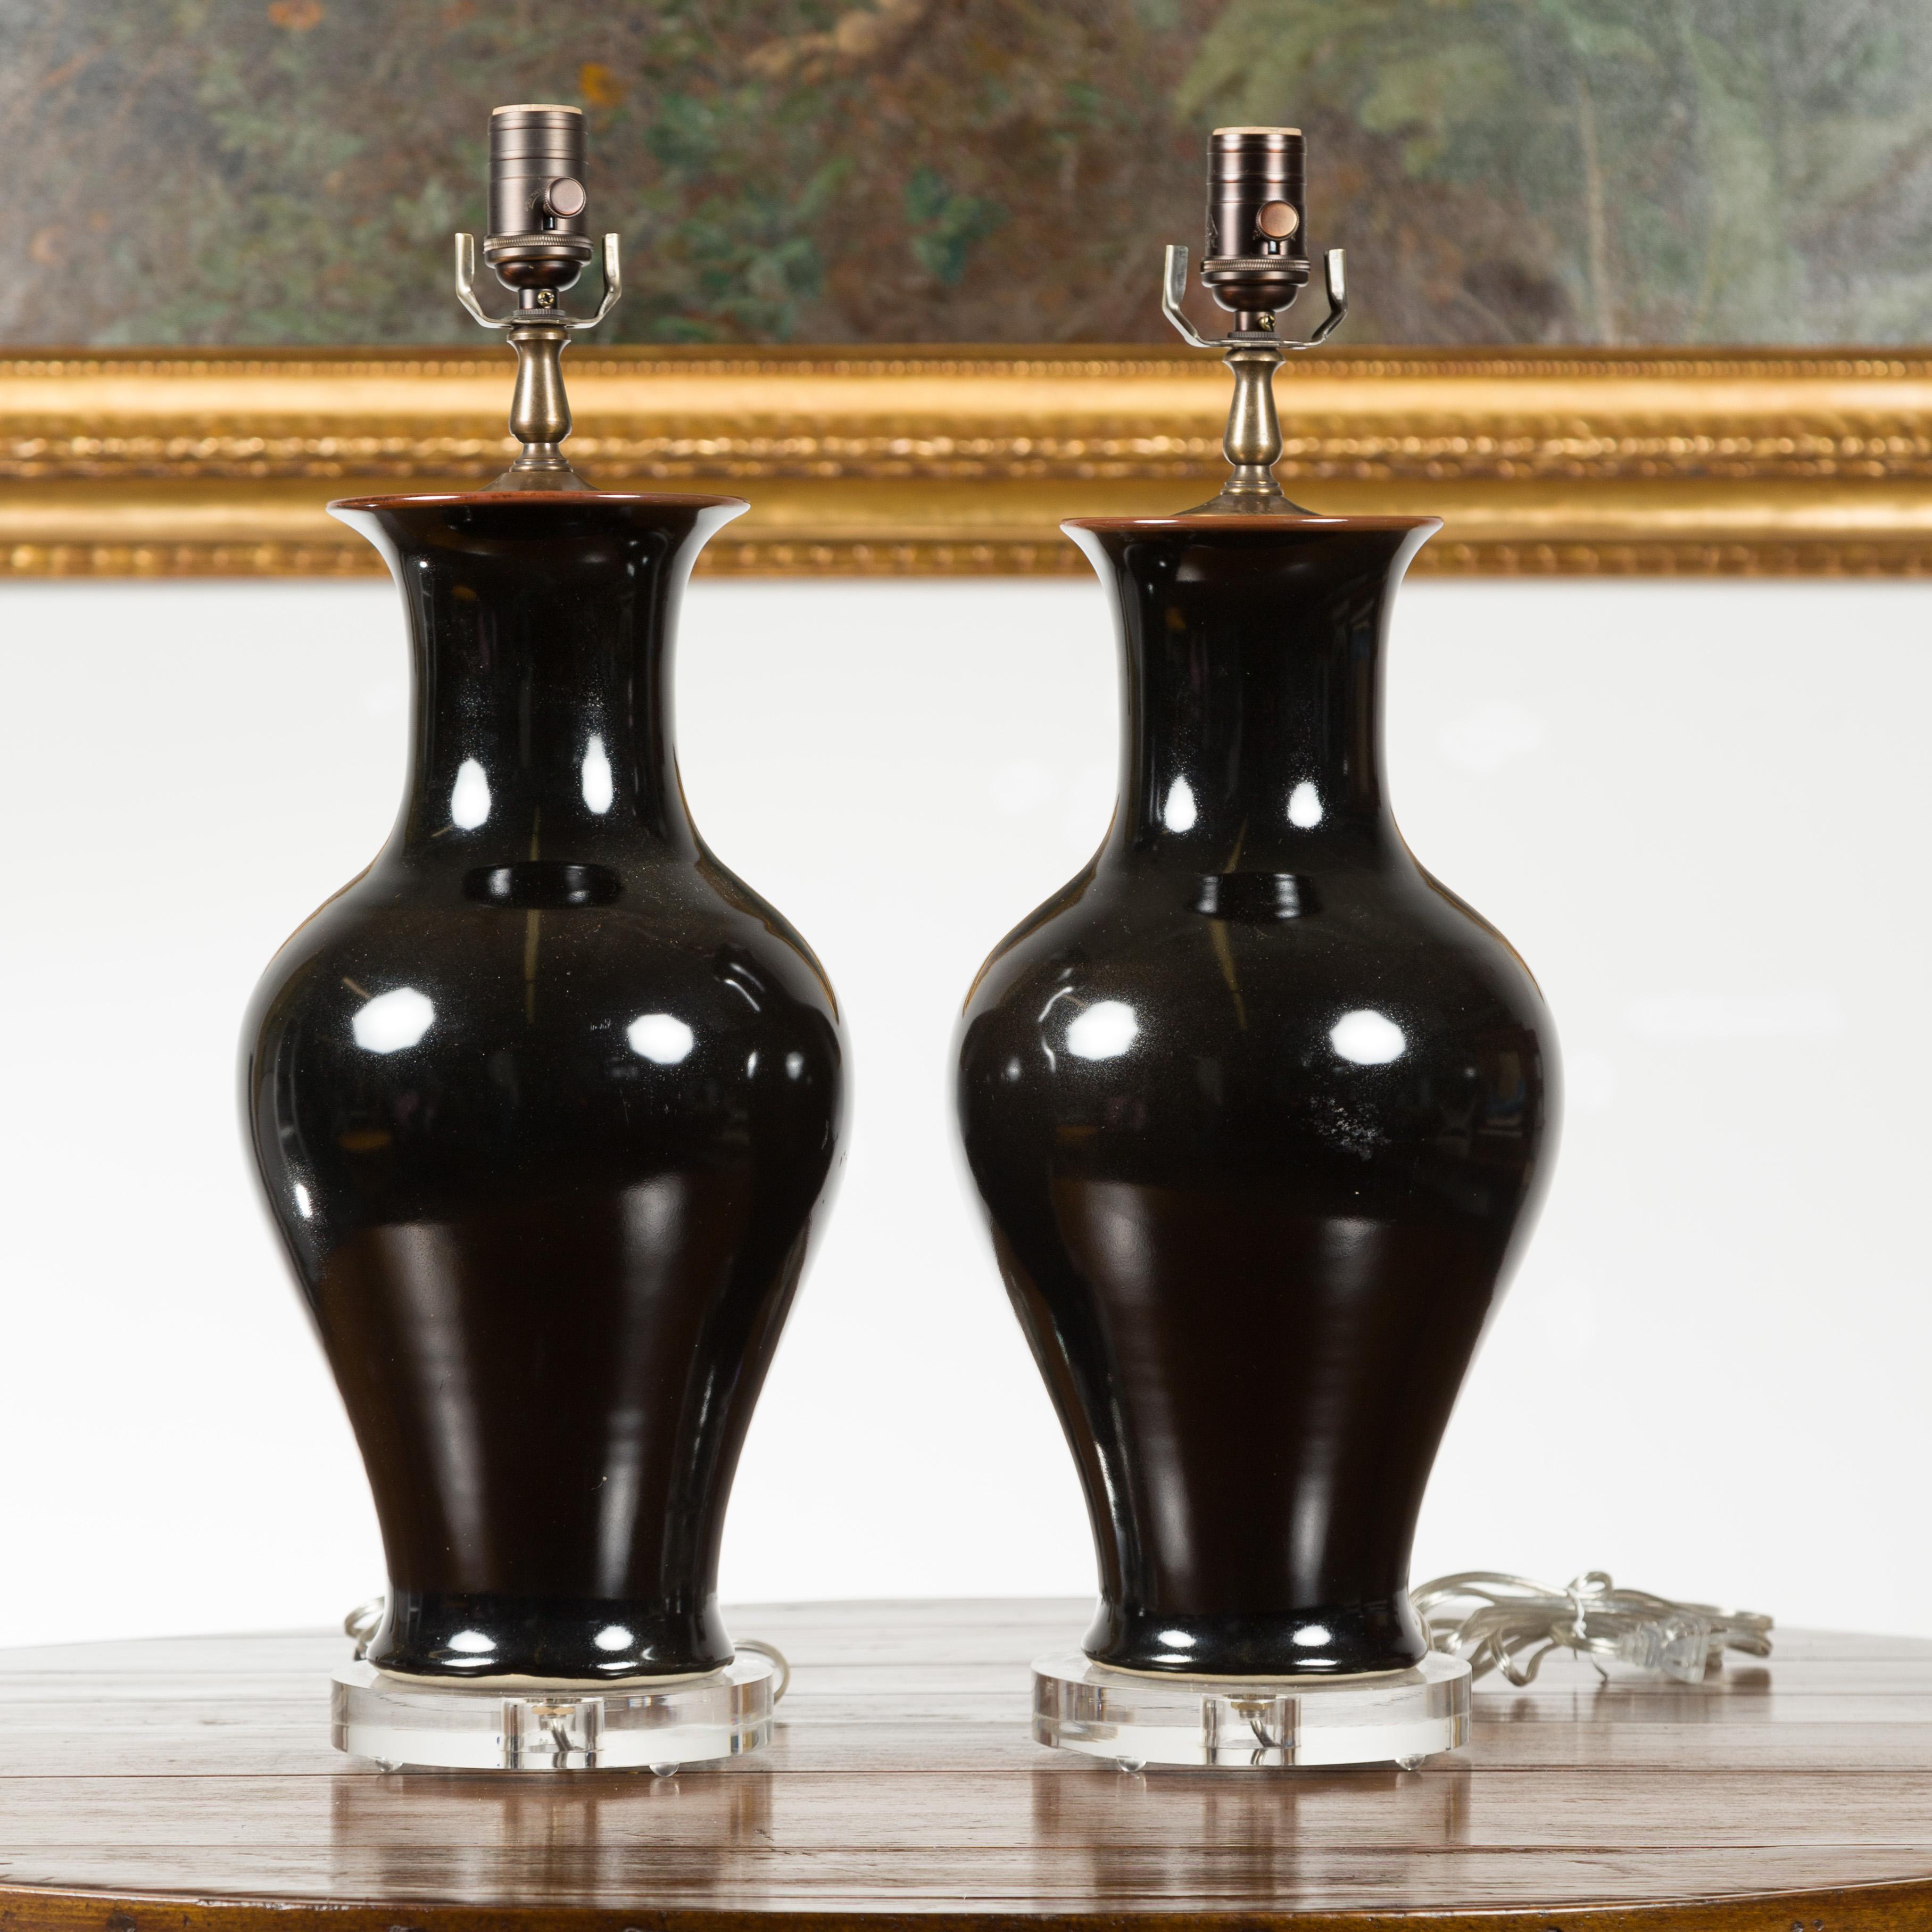 Pair of Black Porcelain Vase Shaped Table Lamps with Round Lucite Bases, Wired In Good Condition For Sale In Atlanta, GA